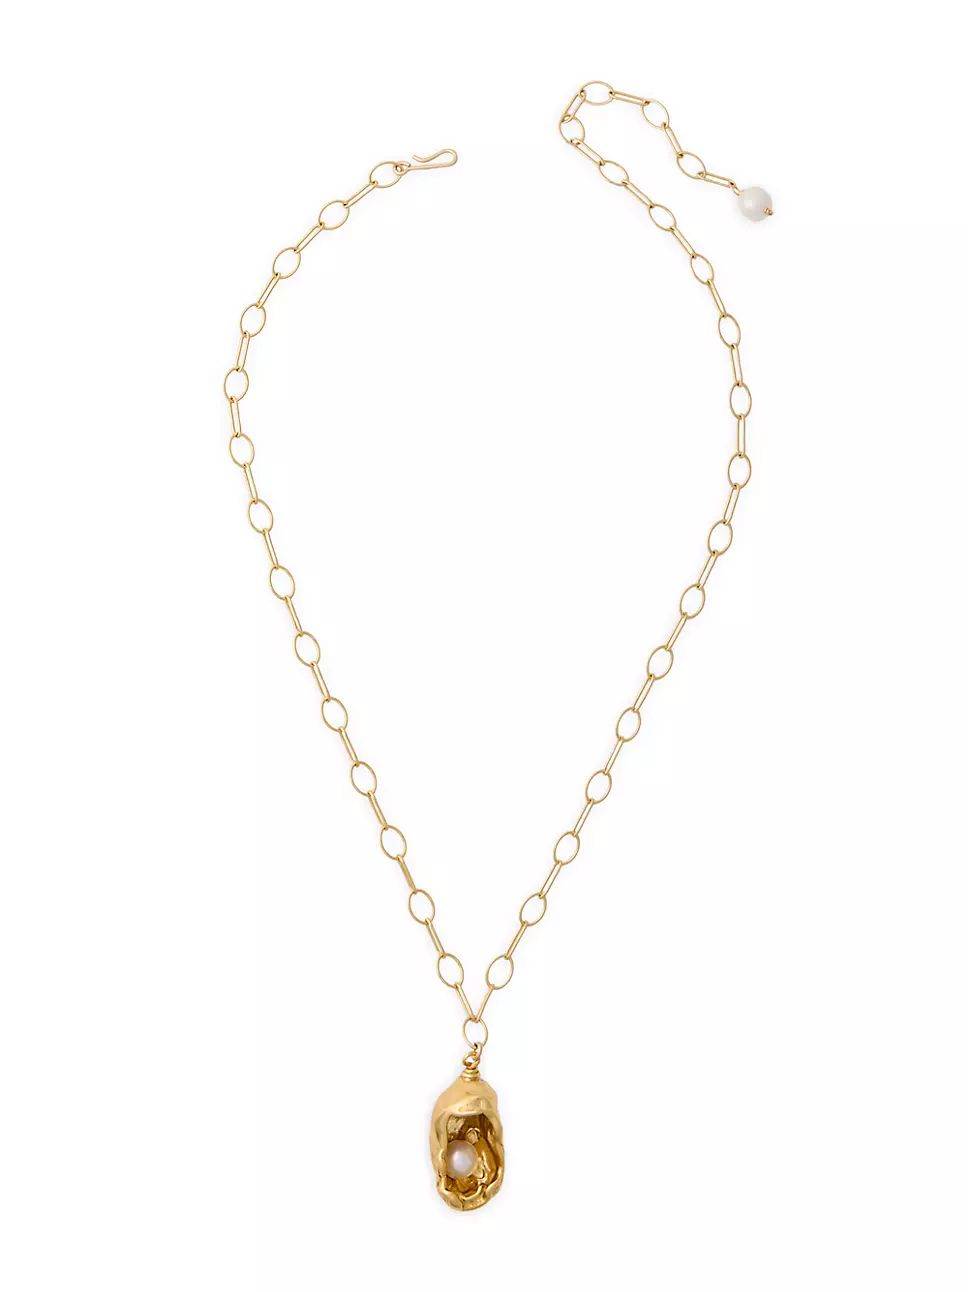 Mary Kate 24K Gold-Plate & Pearl Necklace | Saks Fifth Avenue